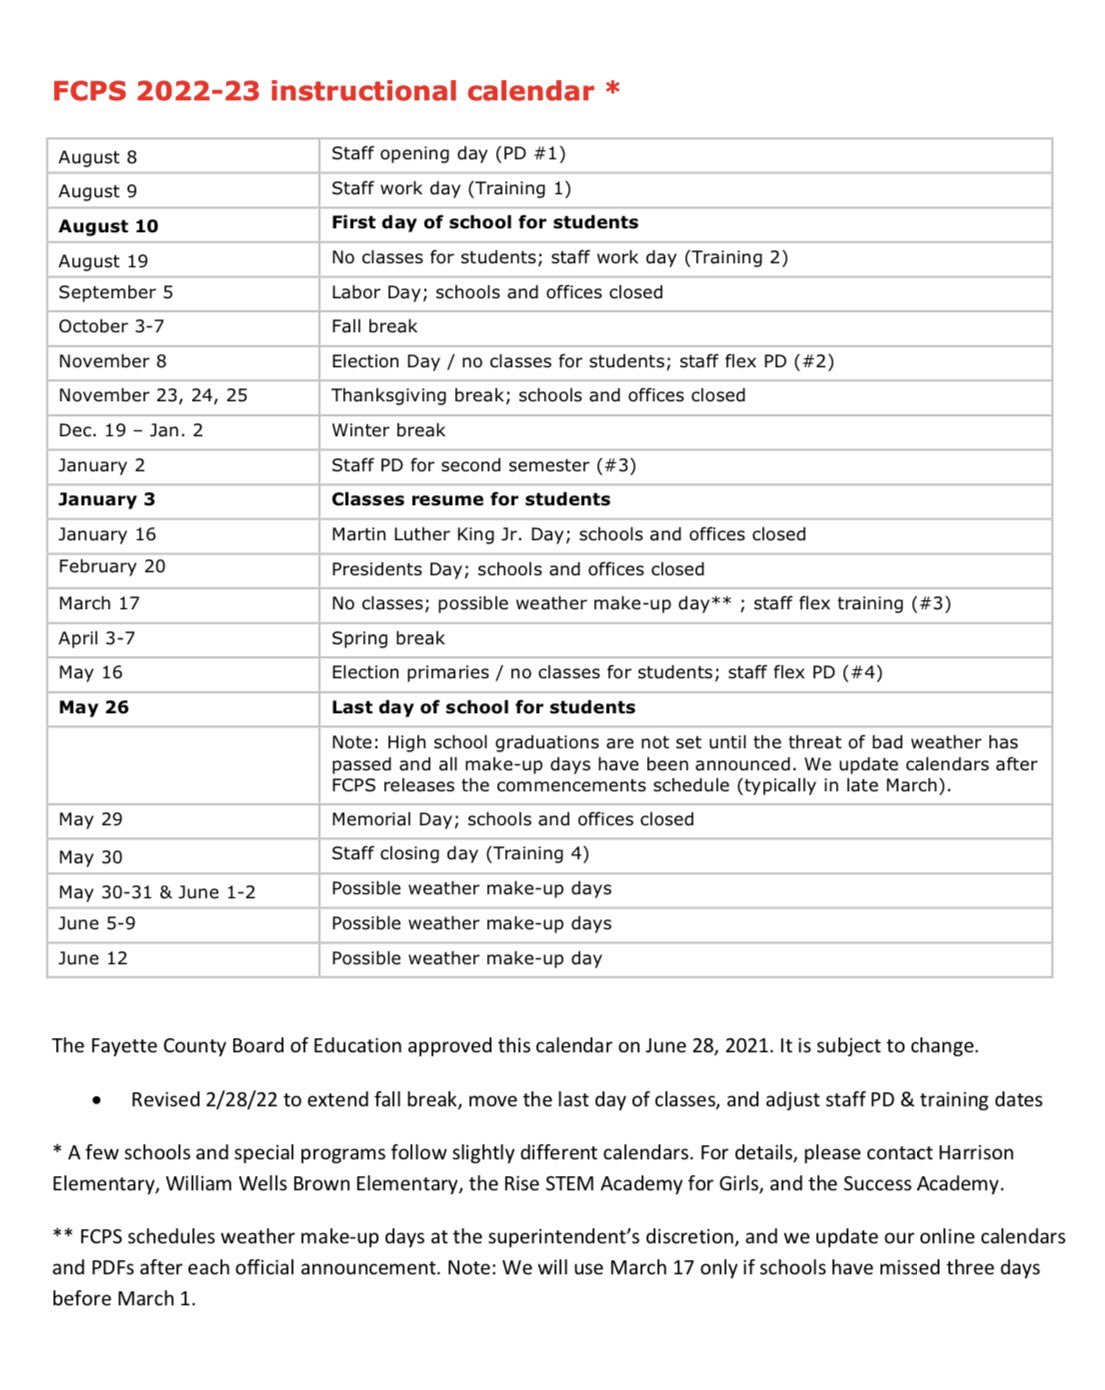 Fcps 2022 2023 Calendar Tyler Murphy On Twitter: "Tonight, Our Board Unanimously Approved An  Amended Version Of The 2022-2023 Instructional Calendar That Would Include  A Week-Long Fall Break From October 3 To 7, 2022, And Move